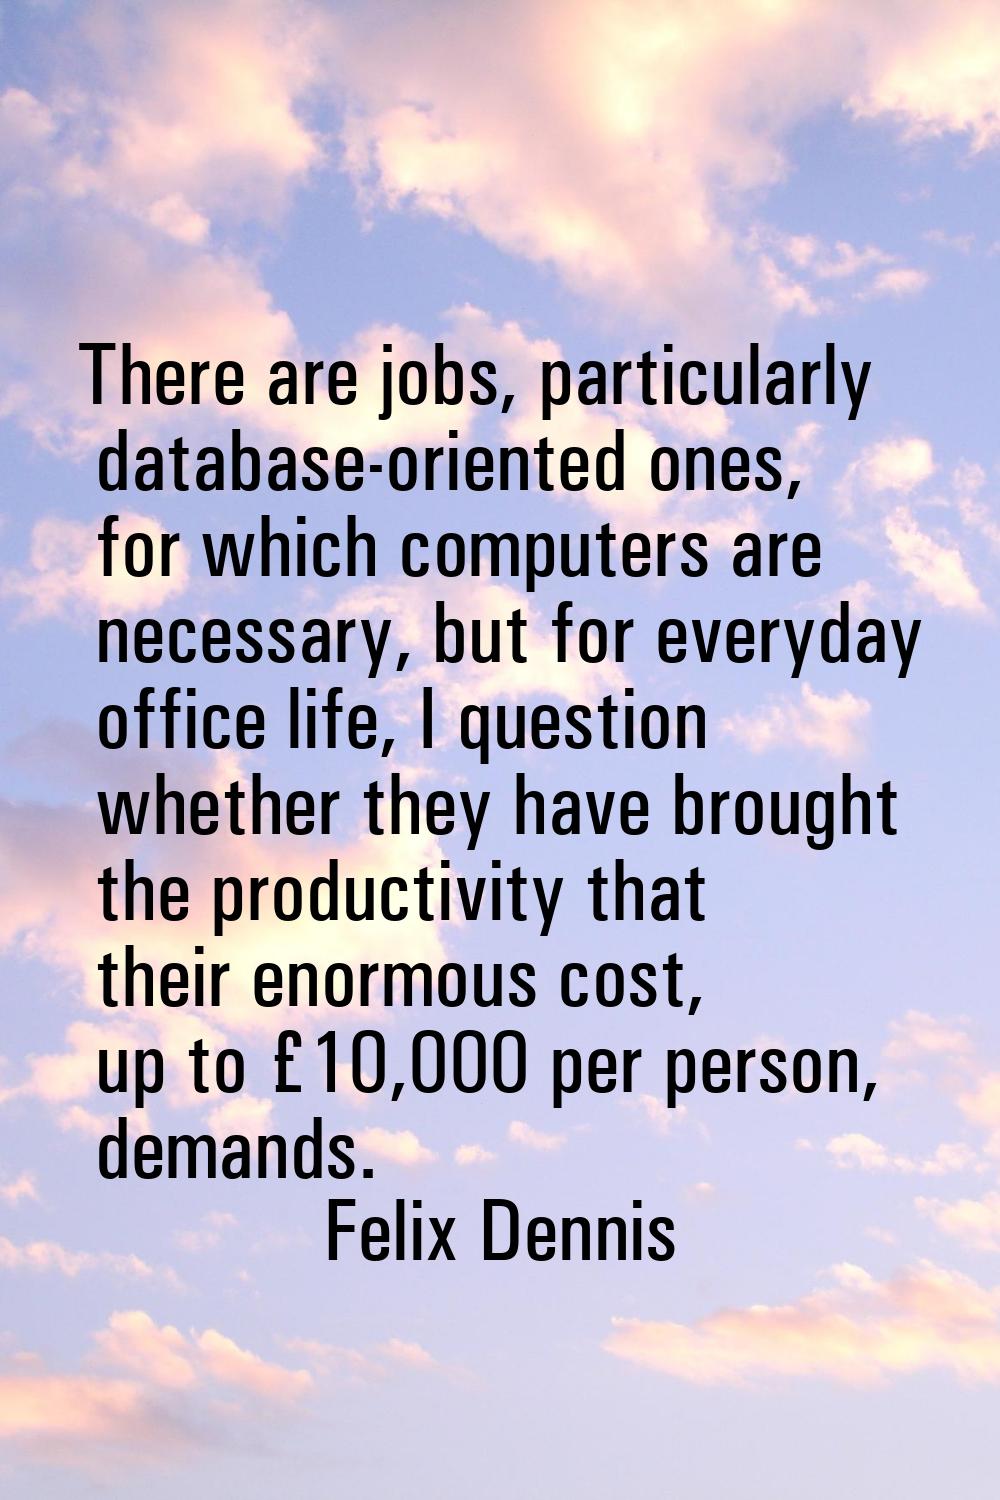 There are jobs, particularly database-oriented ones, for which computers are necessary, but for eve